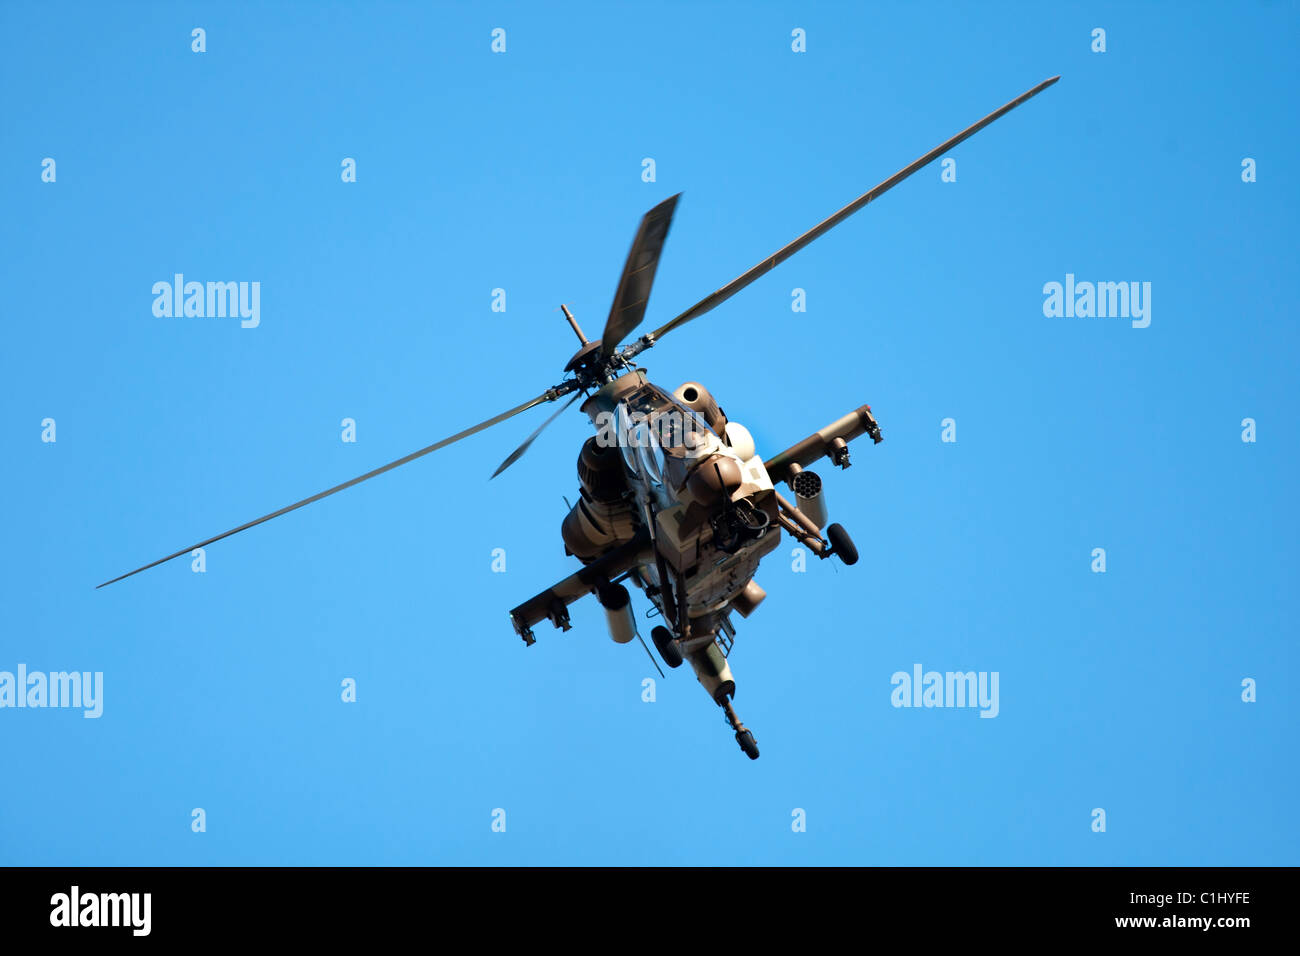 Rooivalk Angriff Hubschrauber Helikopter Air zeigen in Cape Town, South Africa, September 2010 Stockfoto